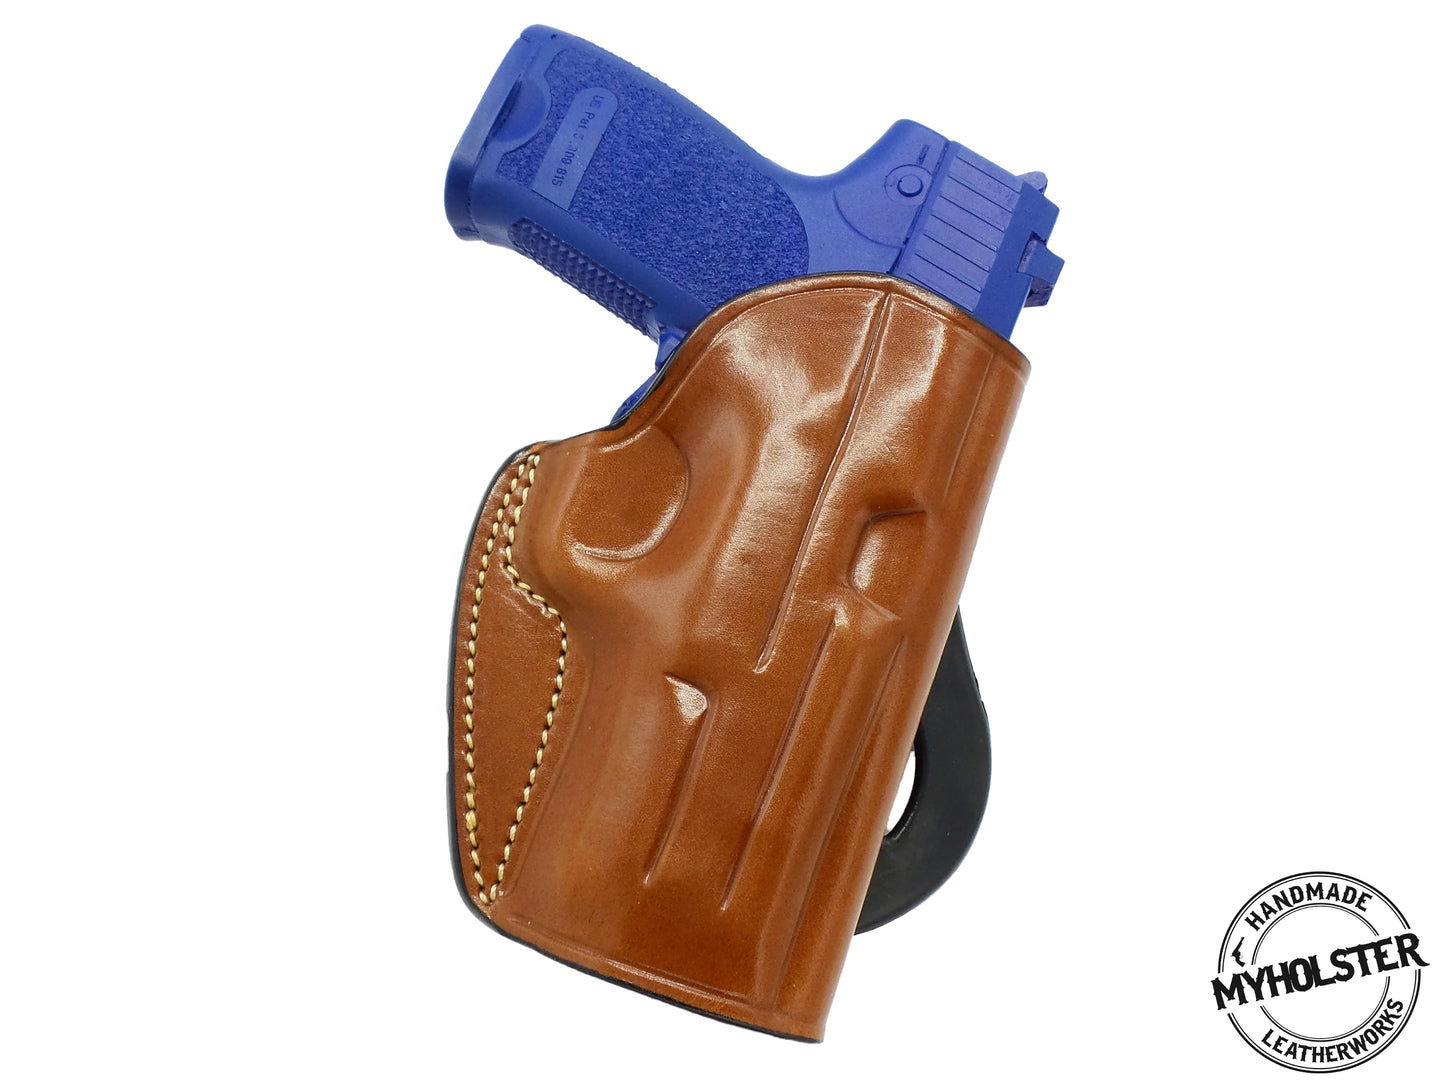 Heckler & Koch P2000 OWB Quick Draw Right Hand Leather Paddle Holster